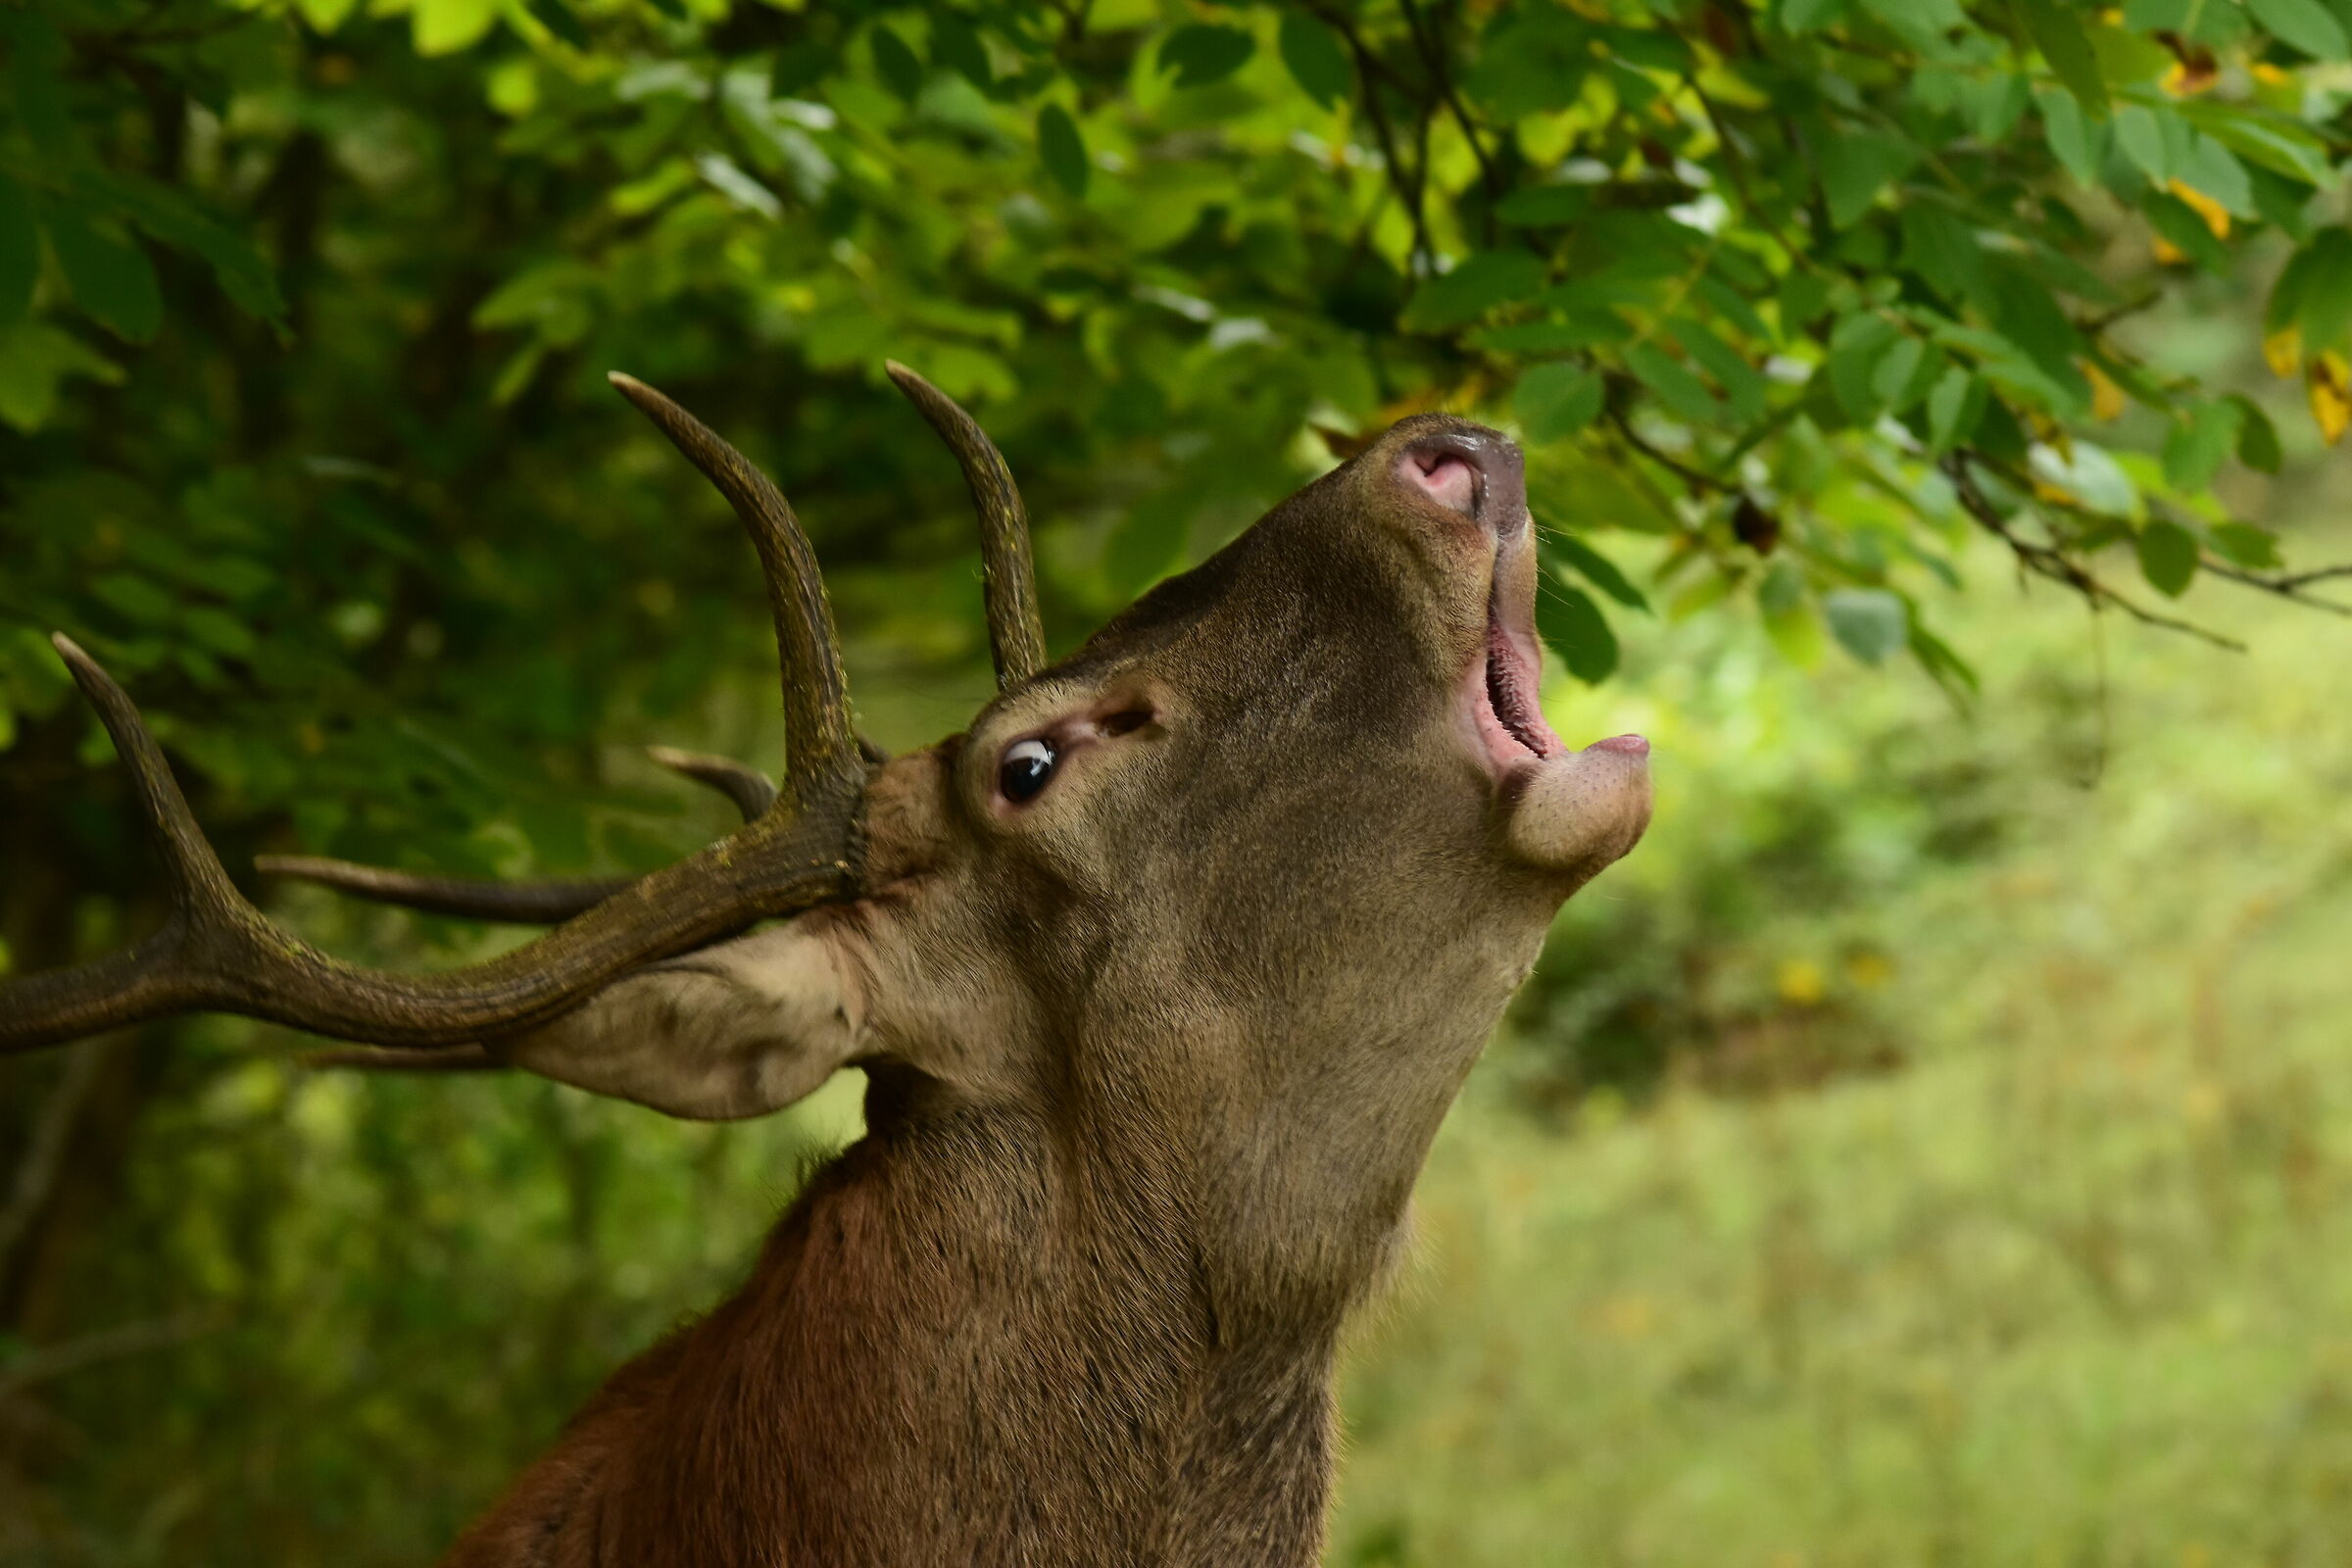 Close-up of the deer craving...